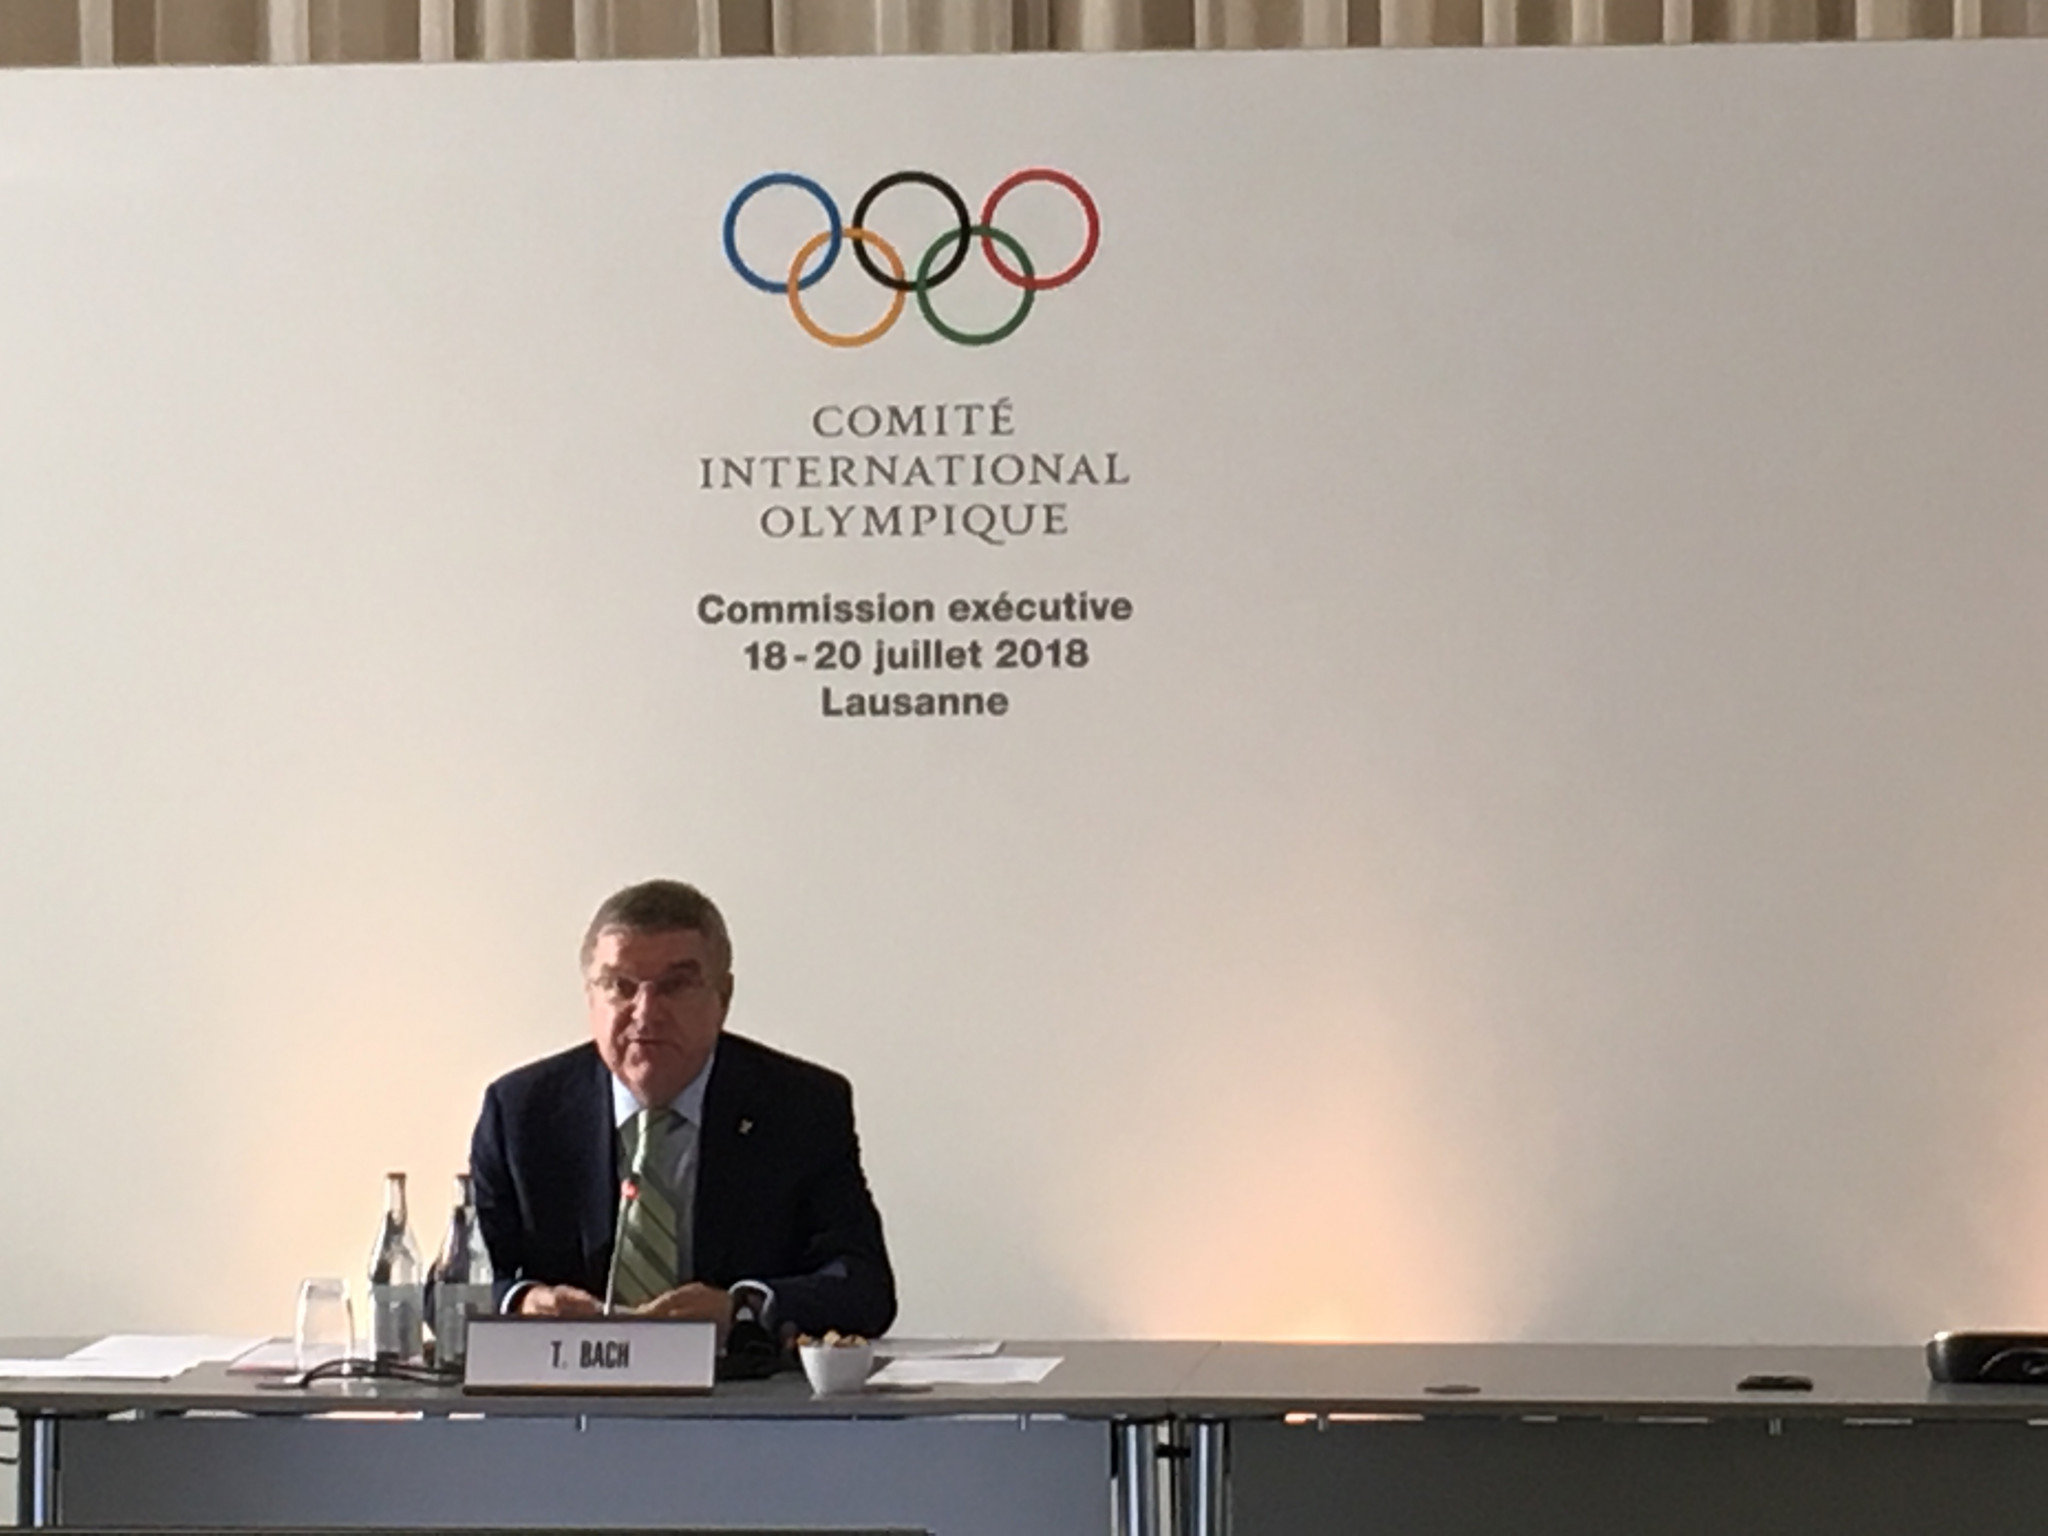 Kuwait's Olympic suspension was just one of the topics discussed by IOC President Thomas Bach and the rest of the Executive Board today ©ITG